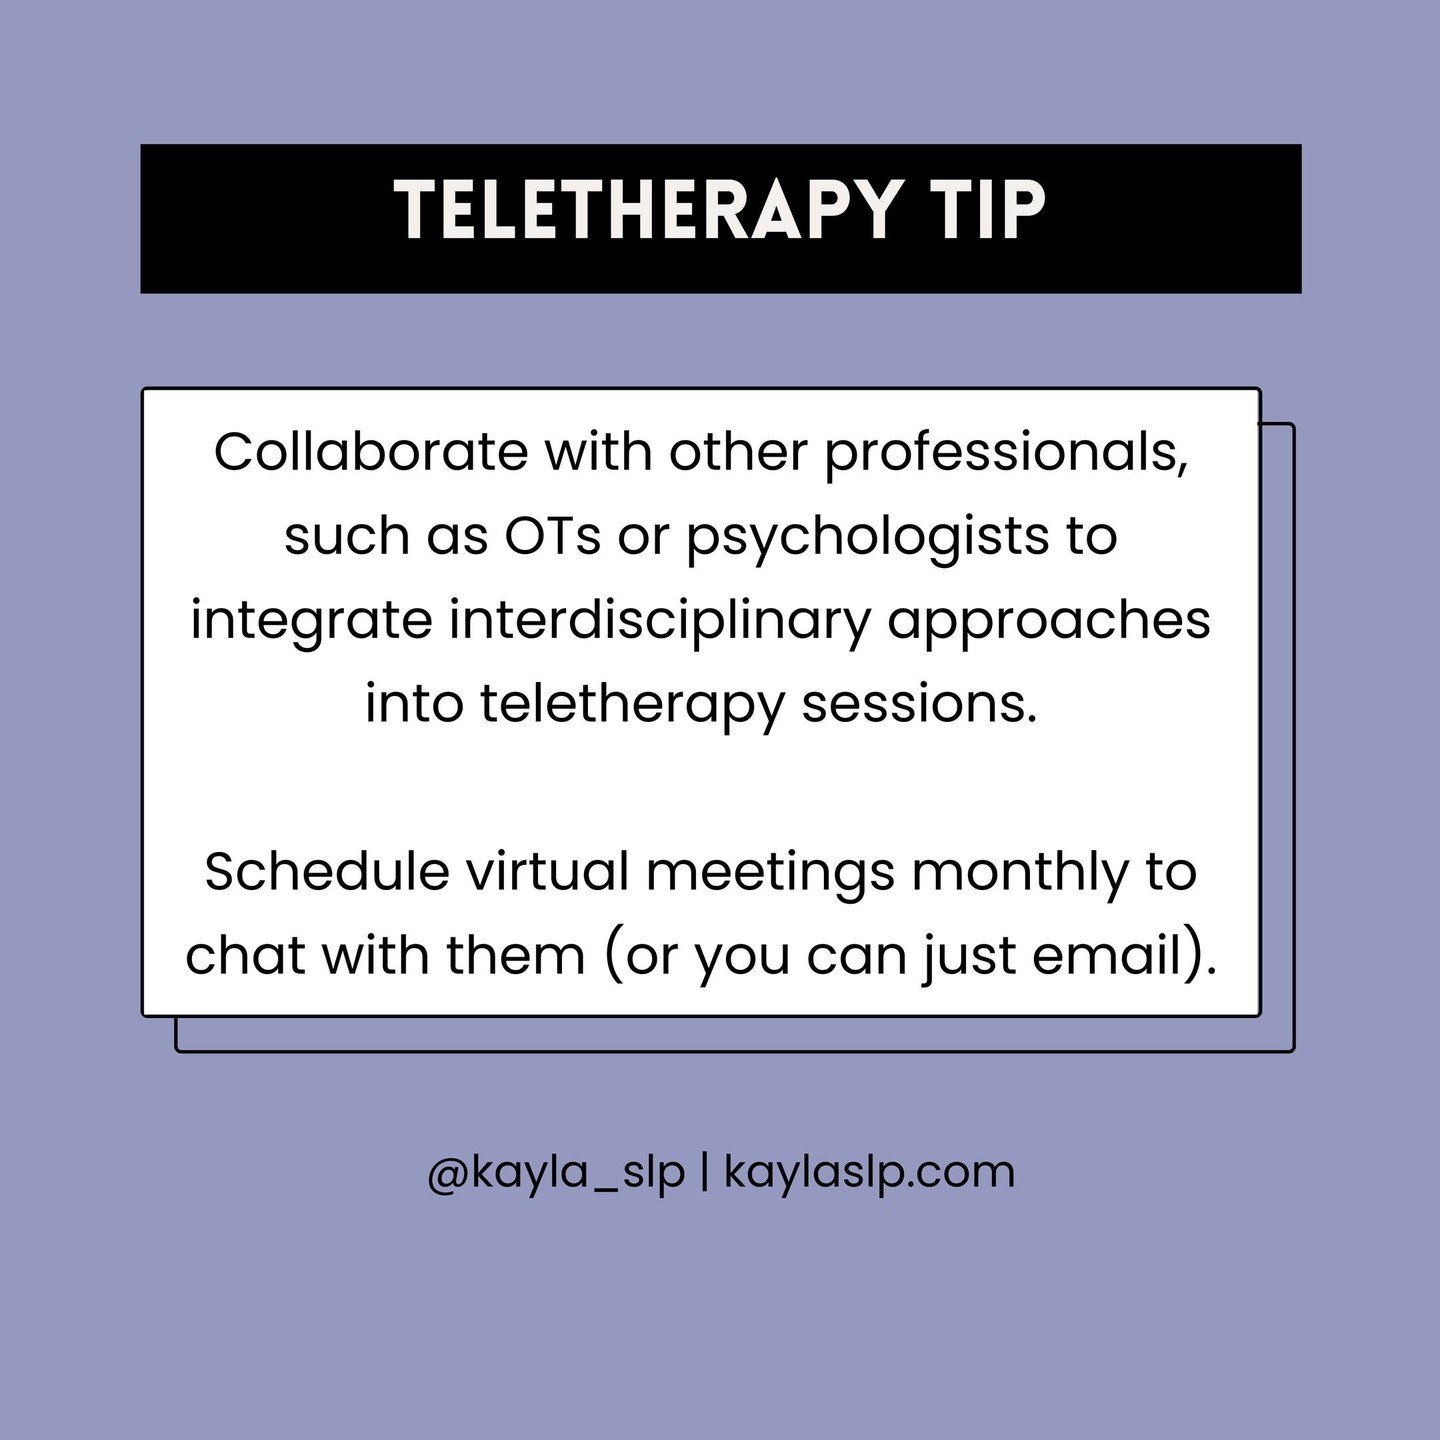 Looking to level up your teletherapy sessions?  Look no further than interdisciplinary collaboration! Collaborate with OTs, psychologists, and more to unlock new strategies and enhance student progress. ⁠
#SLPsofInstagram #SpeechTherapy #SLP #SpeechT